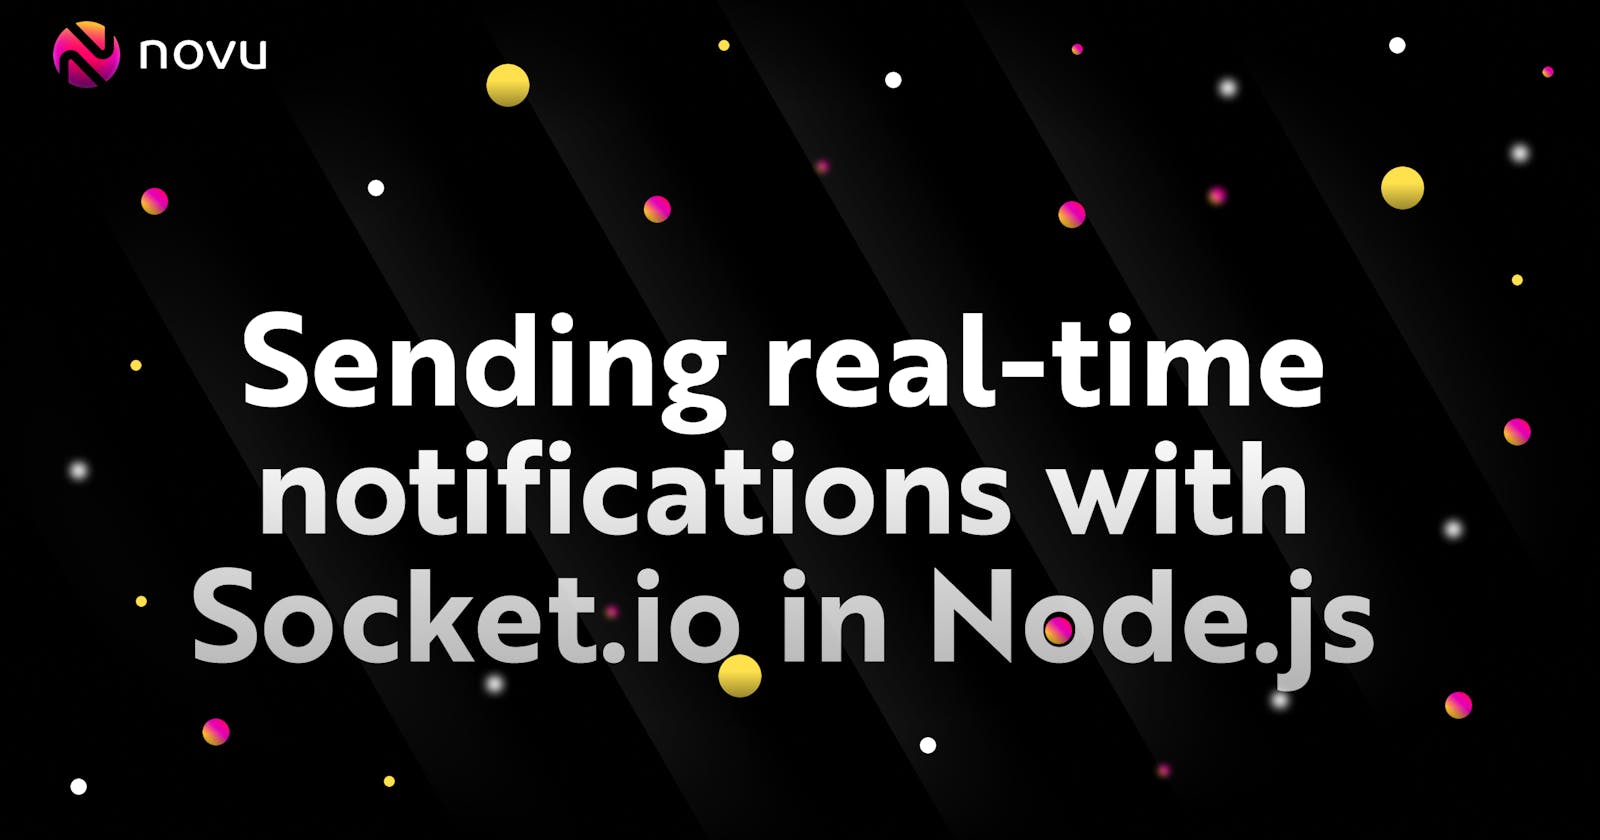 Sending real-time notifications with Socket.io in Node.js